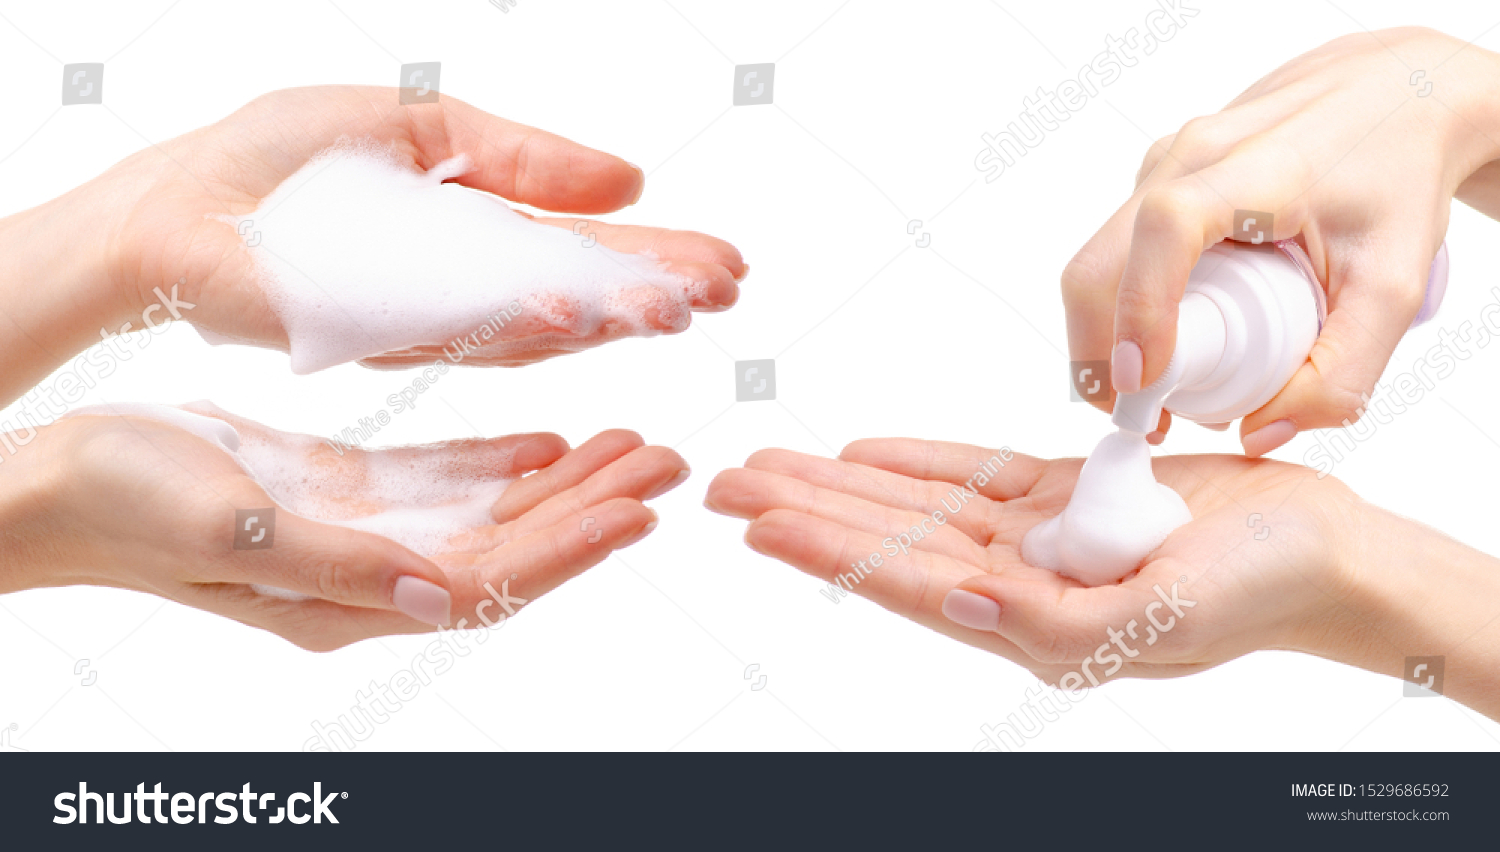 Collage beauty foam in hand on white background isolation #1529686592